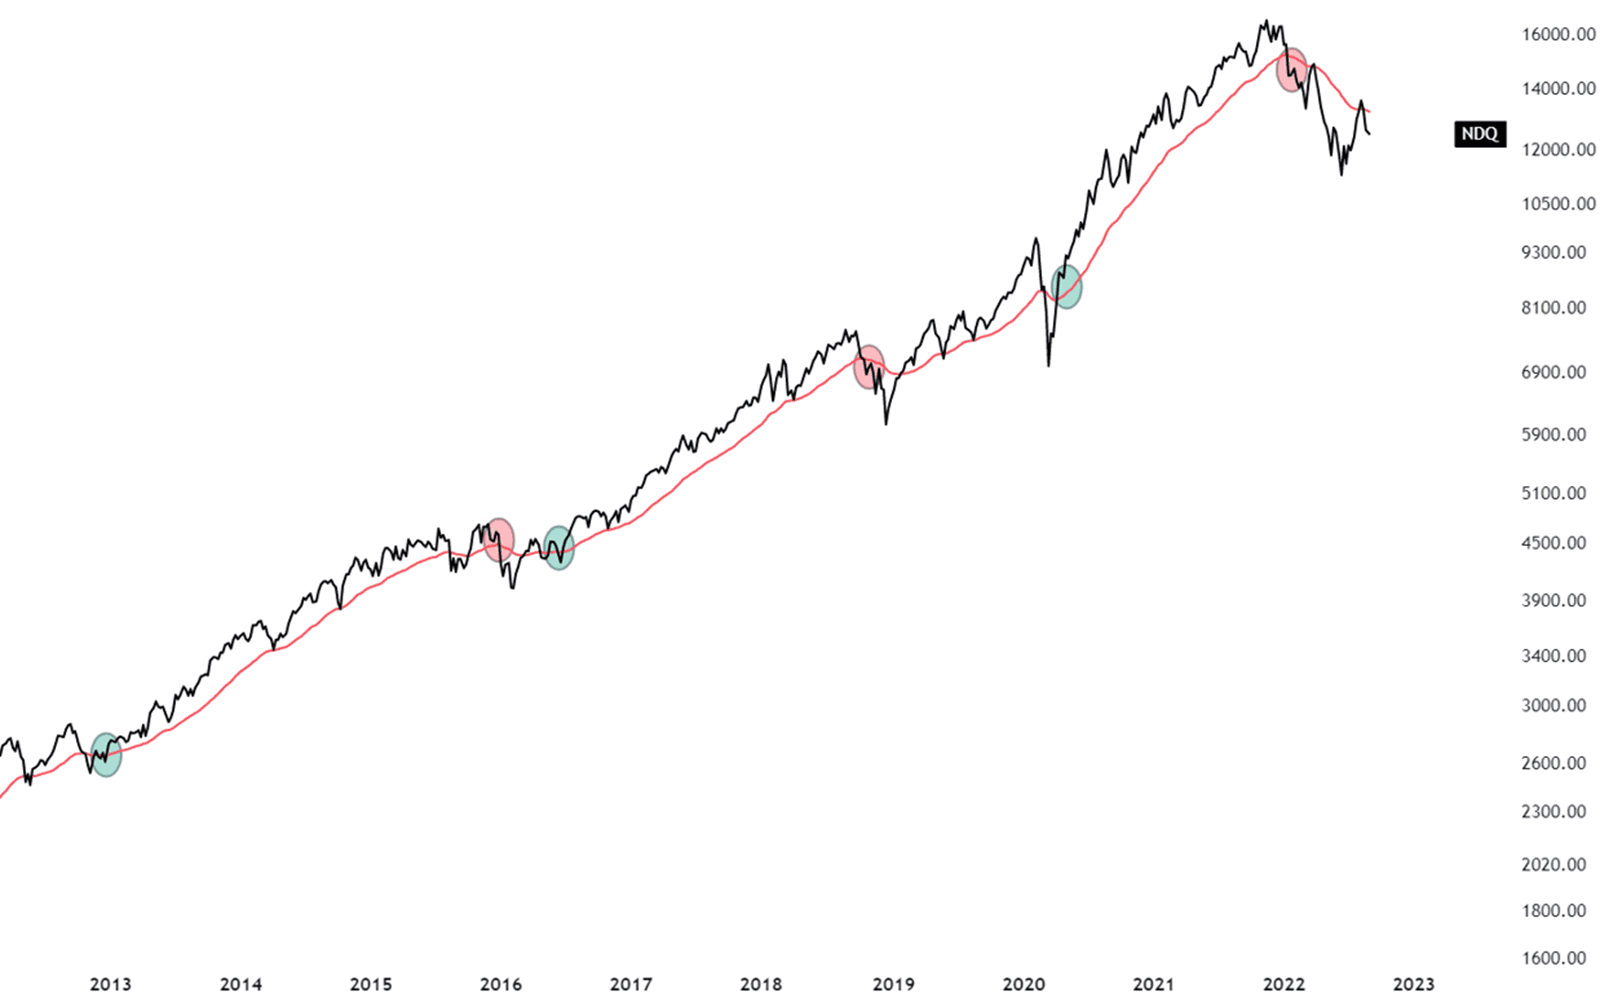 34-week exponential moving average (green line) for Nasdaq-100 (black line). Source: TradingView.